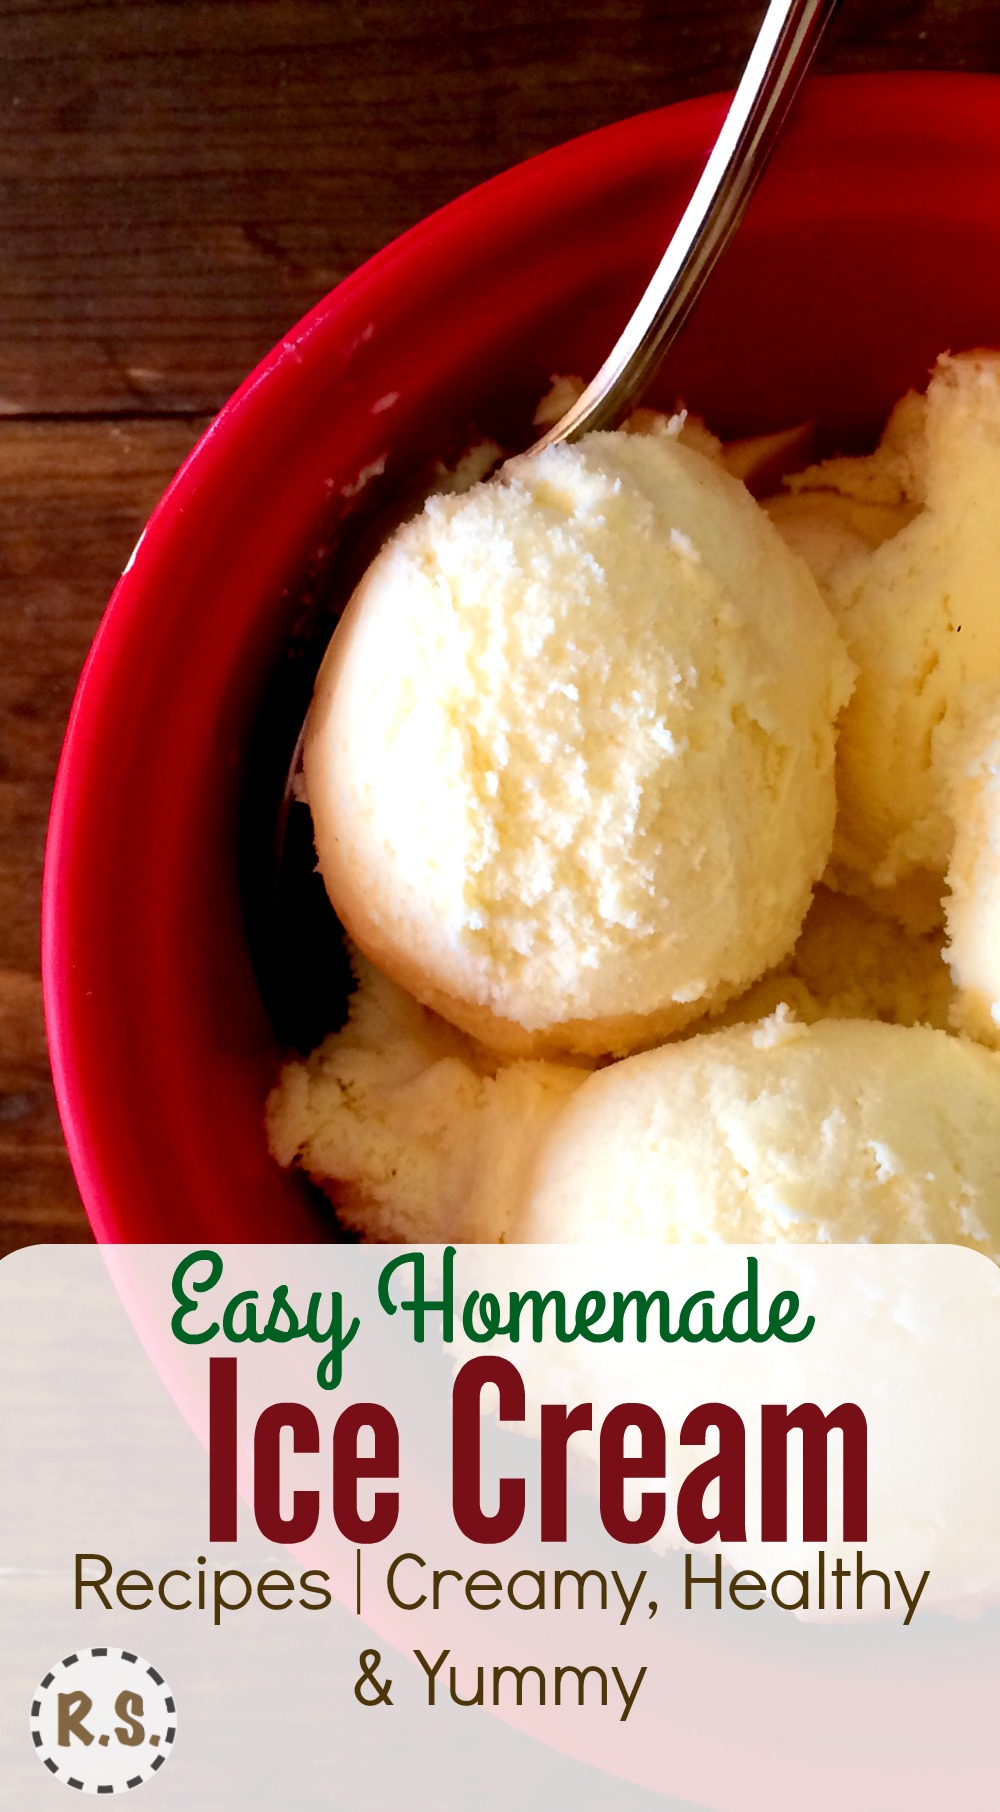 Enjoy making these easy ice cream recipes! There's nothing like good homemade ice cream. Especially when you are raising or growing the ingredients right in your backyard!